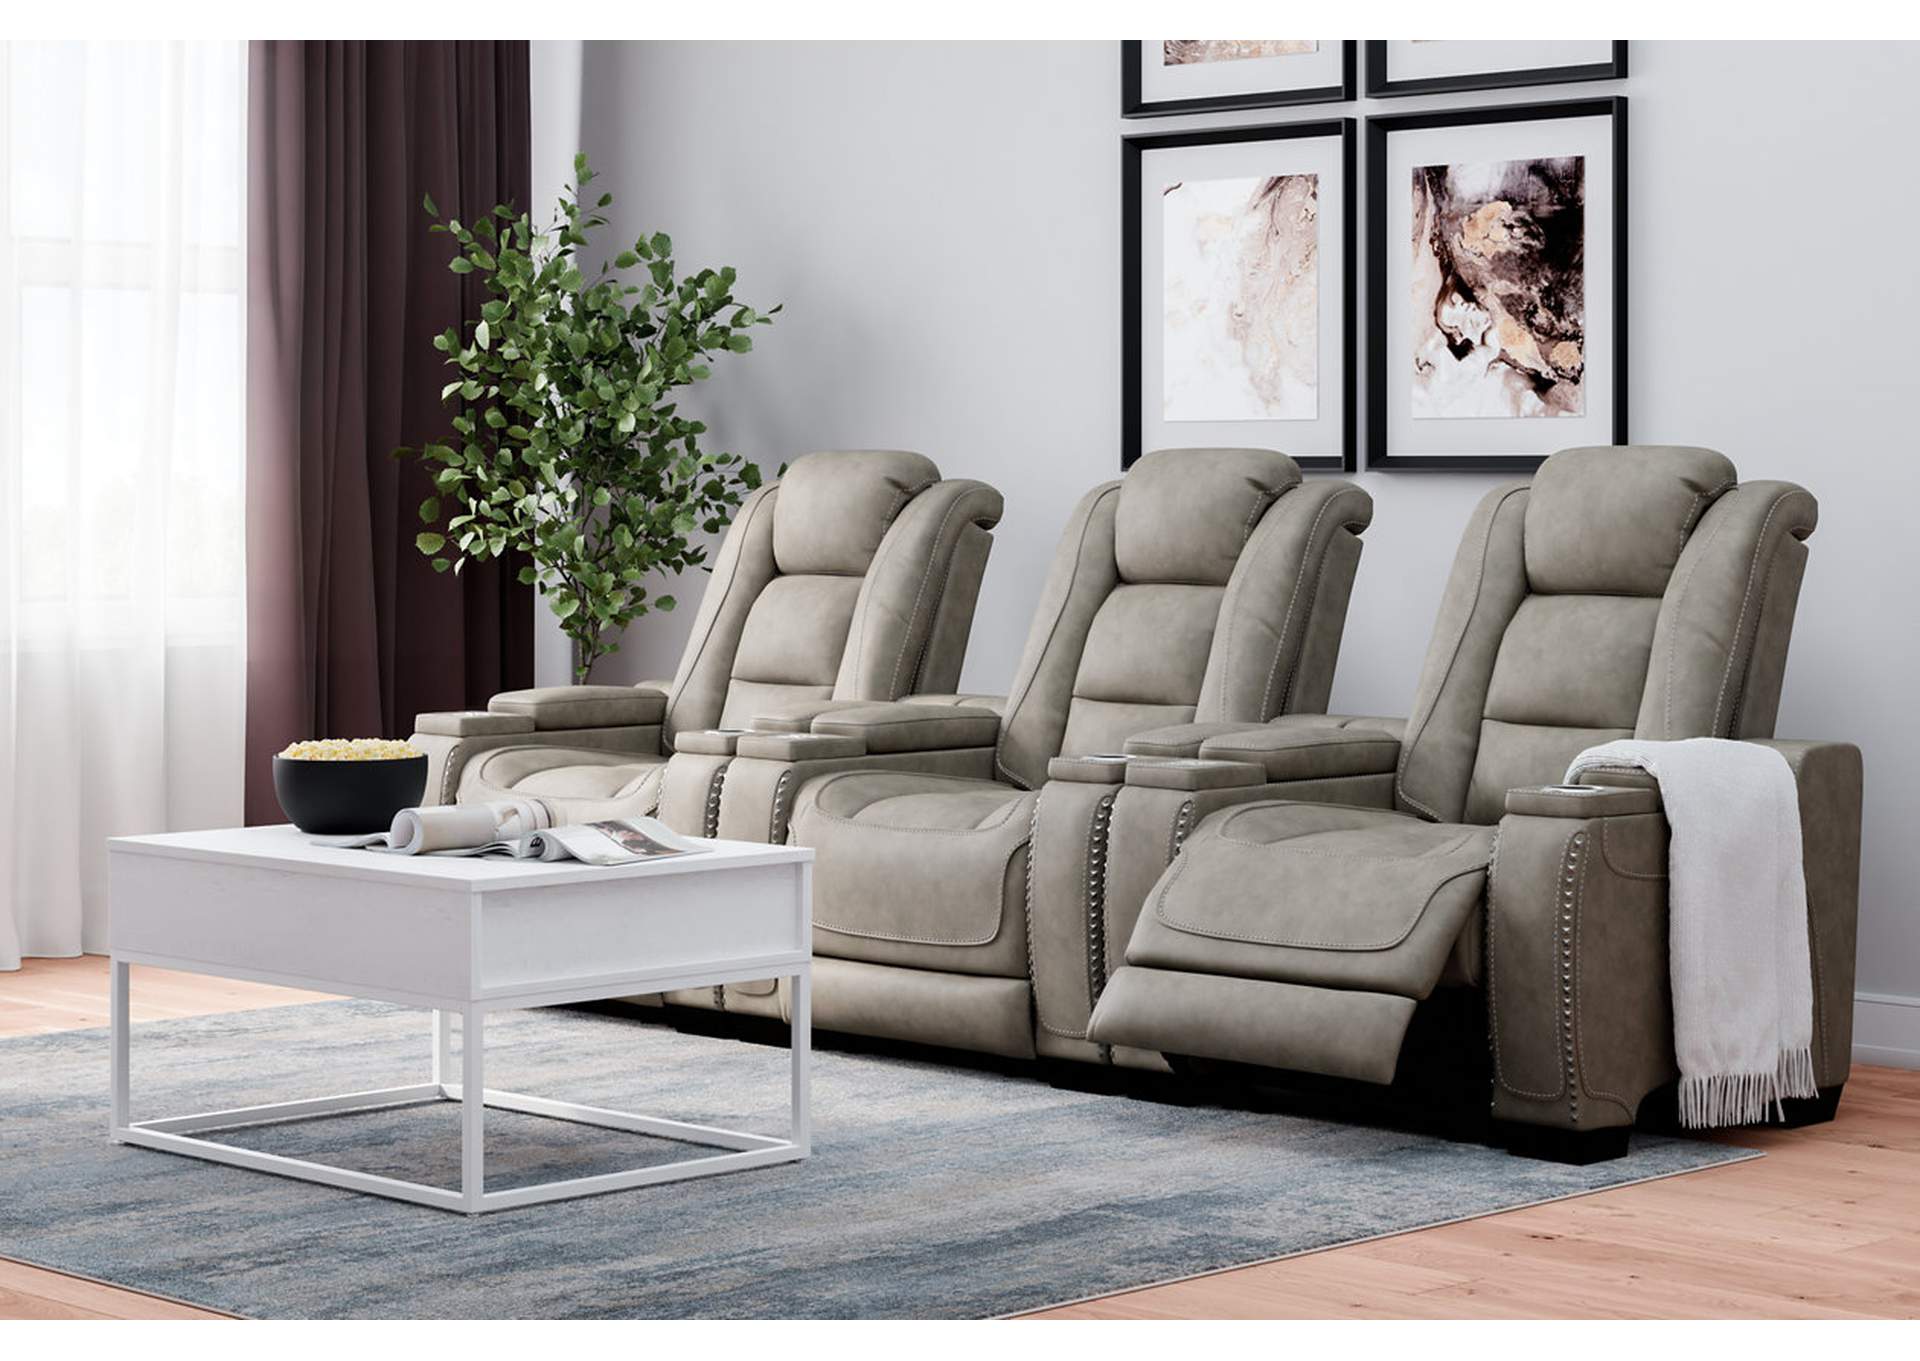 The Man-Den 3-Piece Home Theater Seating,Signature Design By Ashley